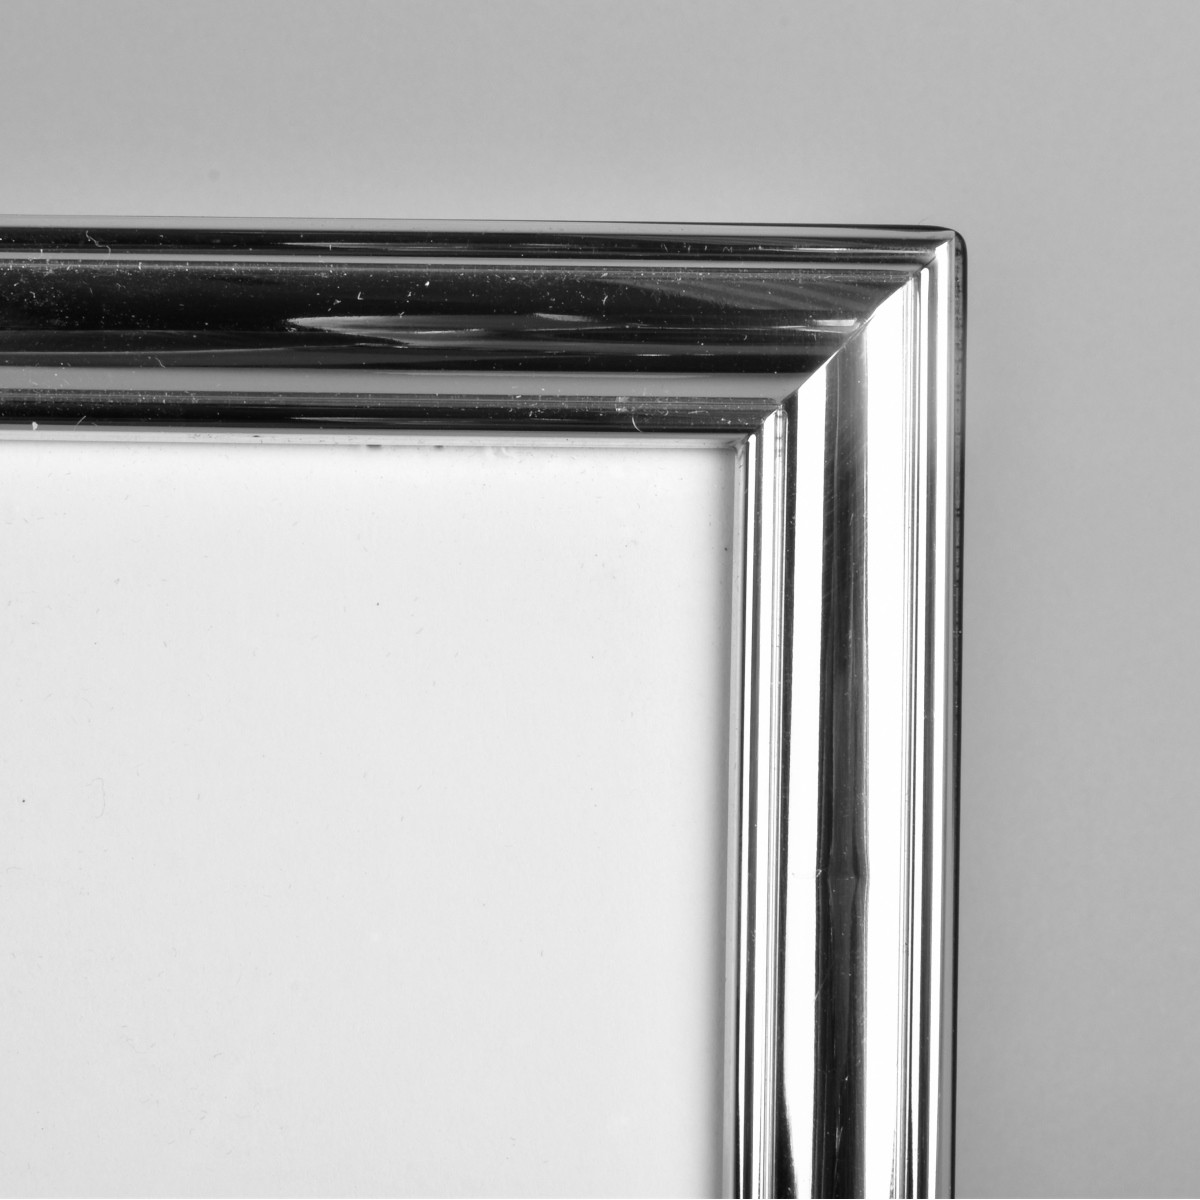 Christofle Sterling Picture Frame